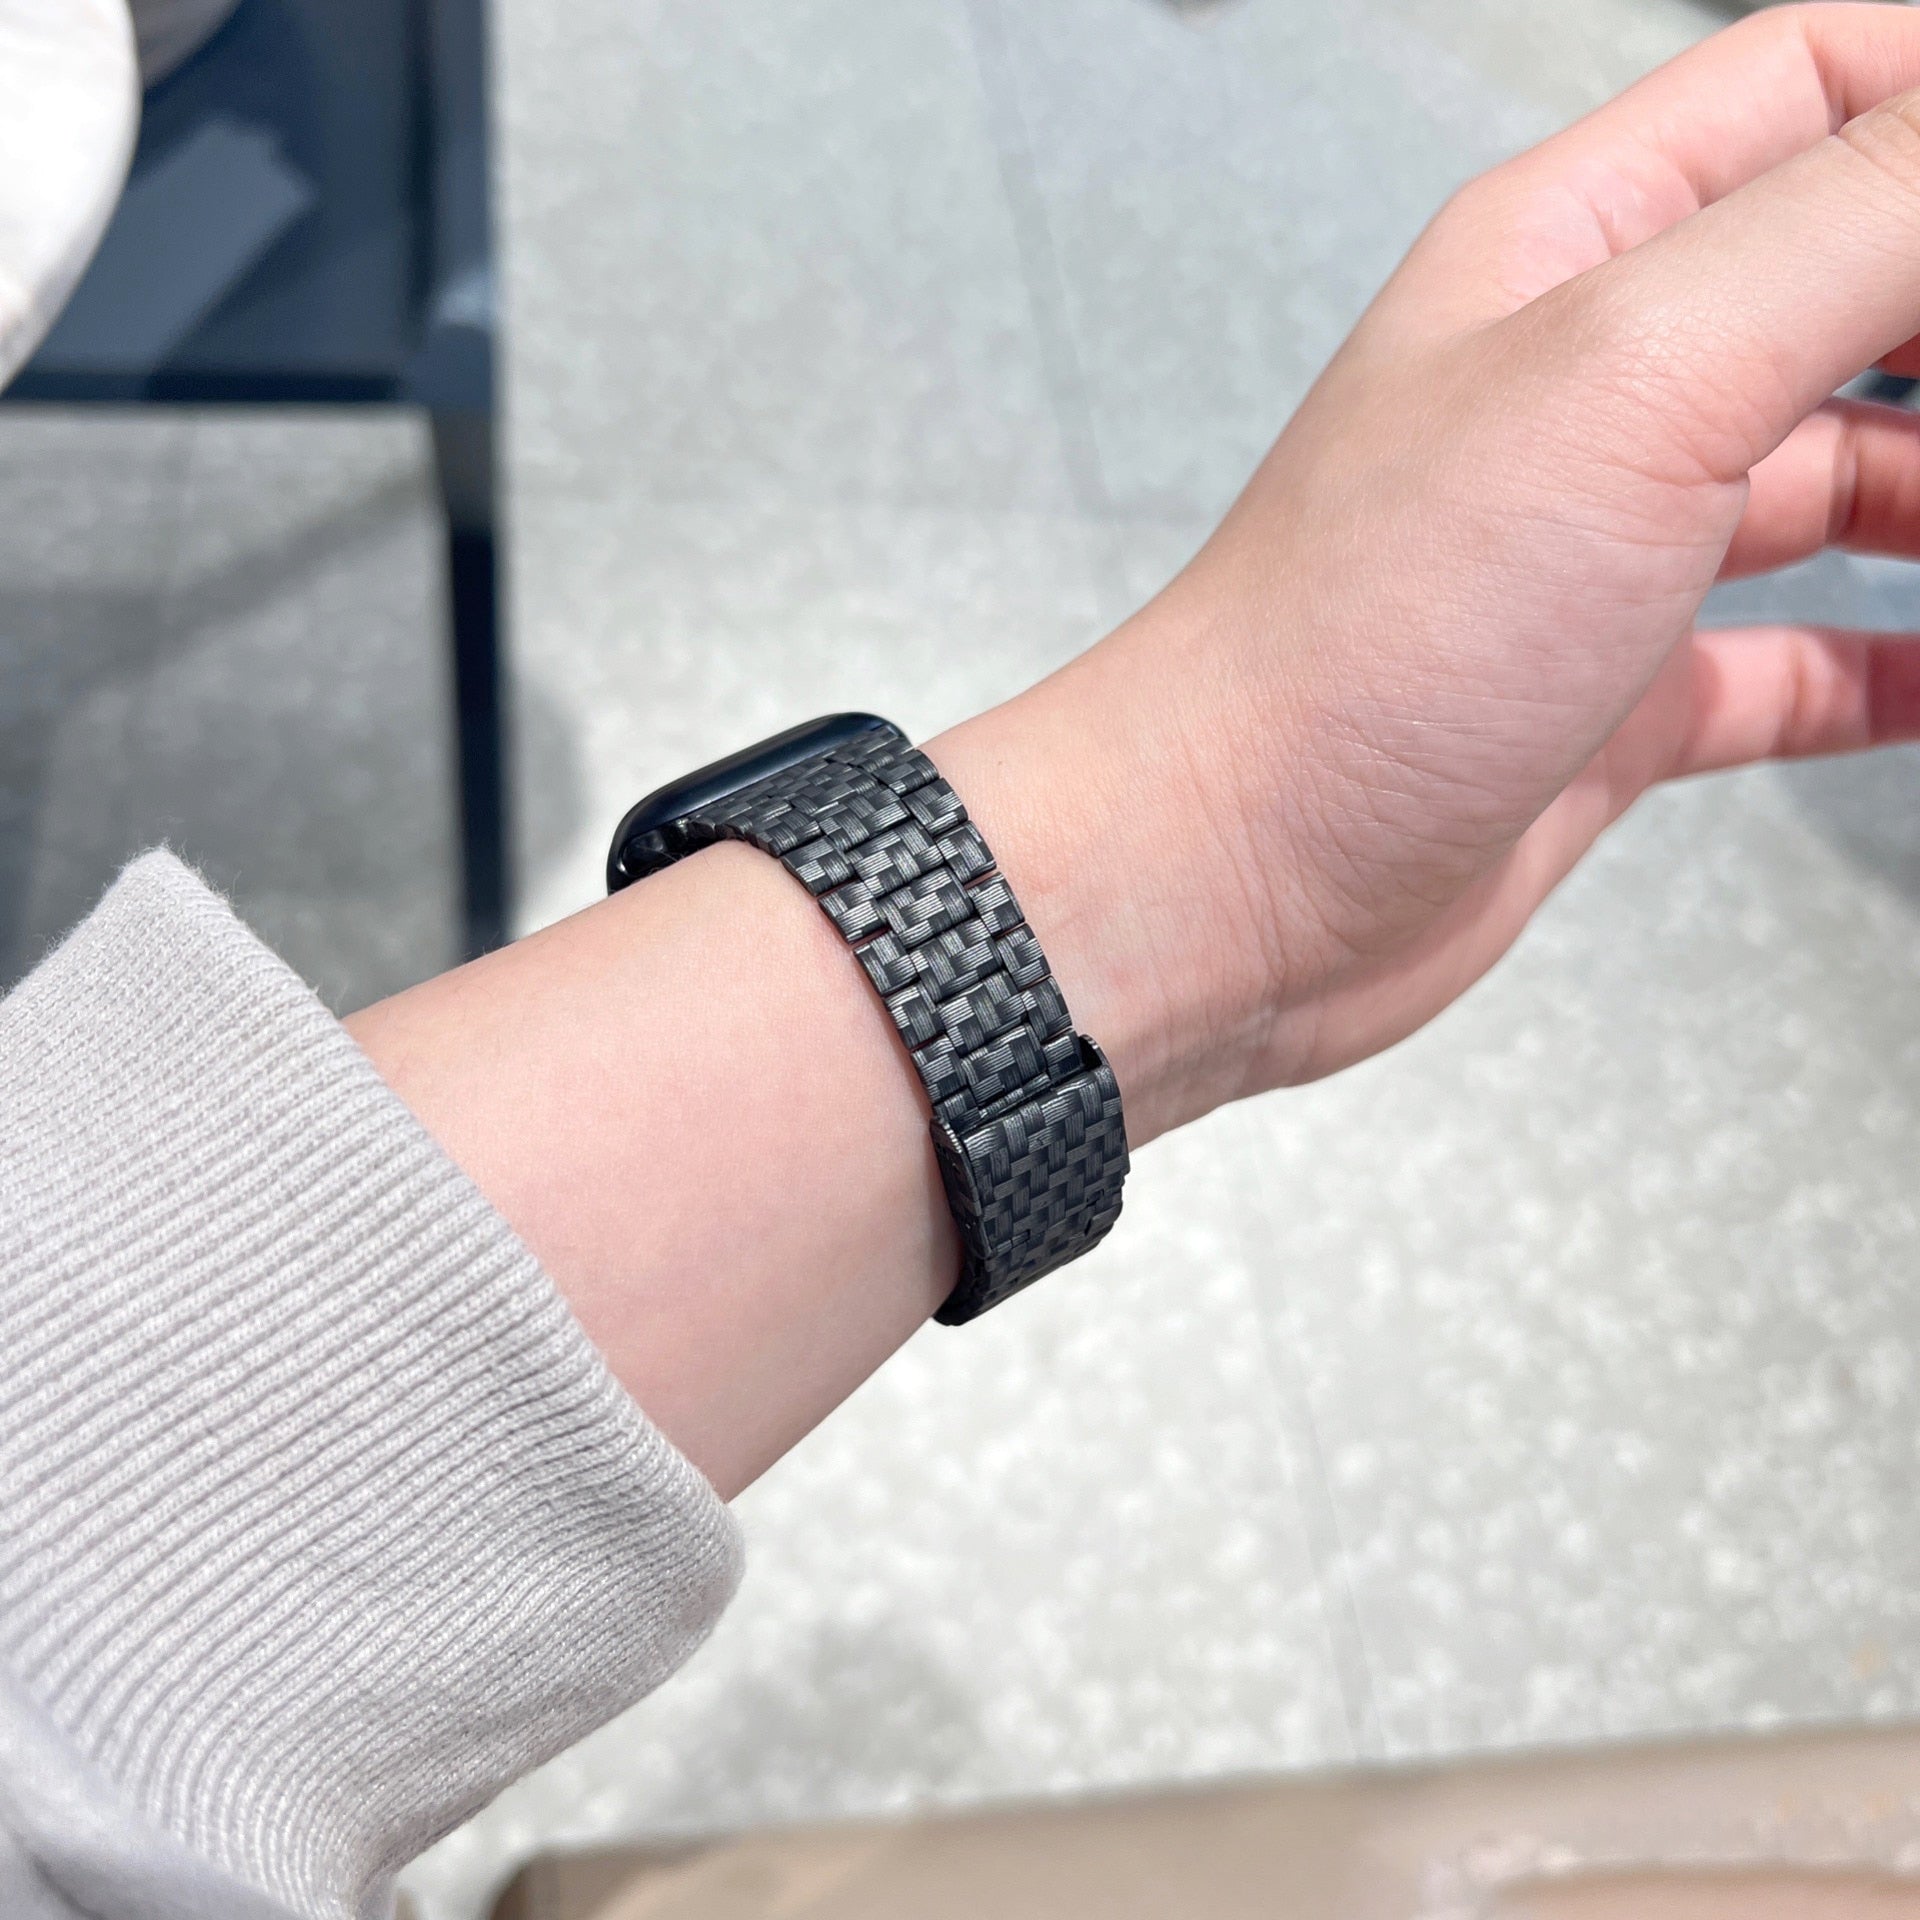 Carbon Fiber Band for Apple Watch